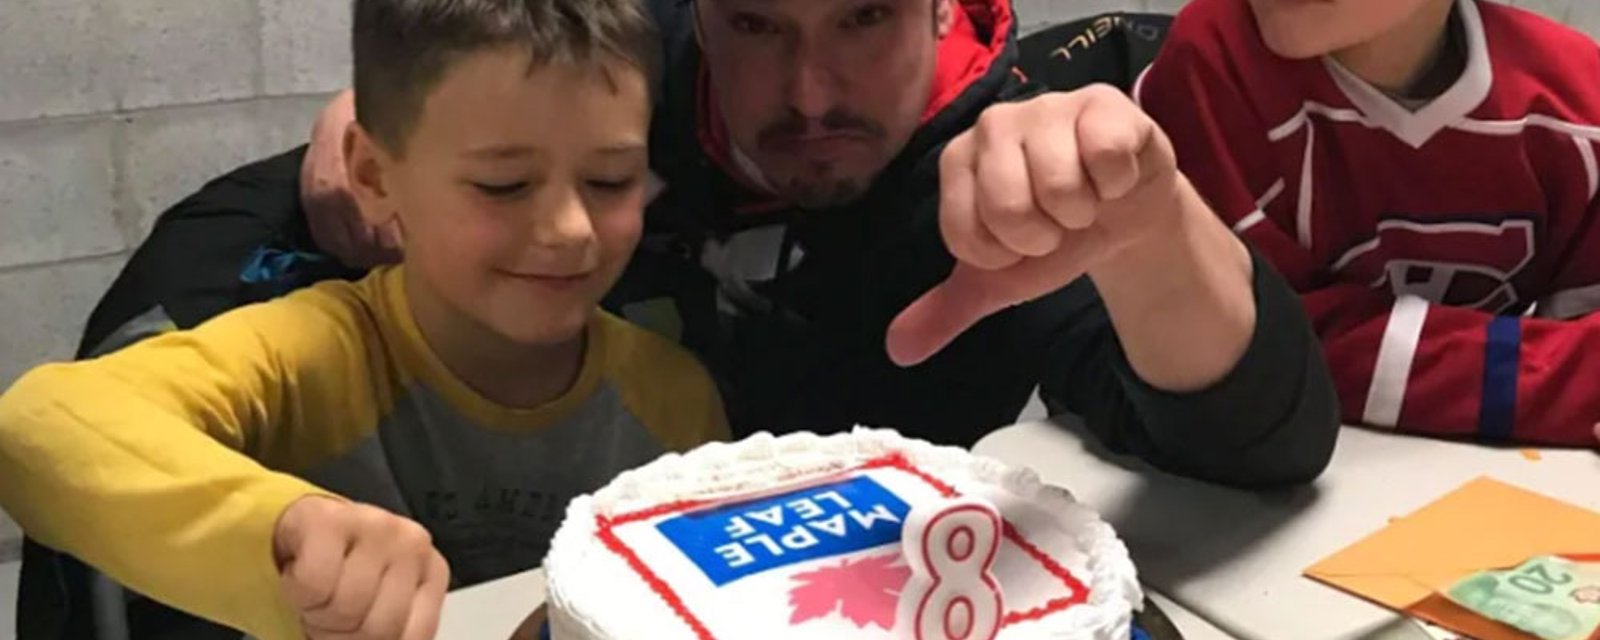 Jacob wanted a Leafs cake for his 8th birthday, Quebec bakery uses Maple Leaf Foods logo instead